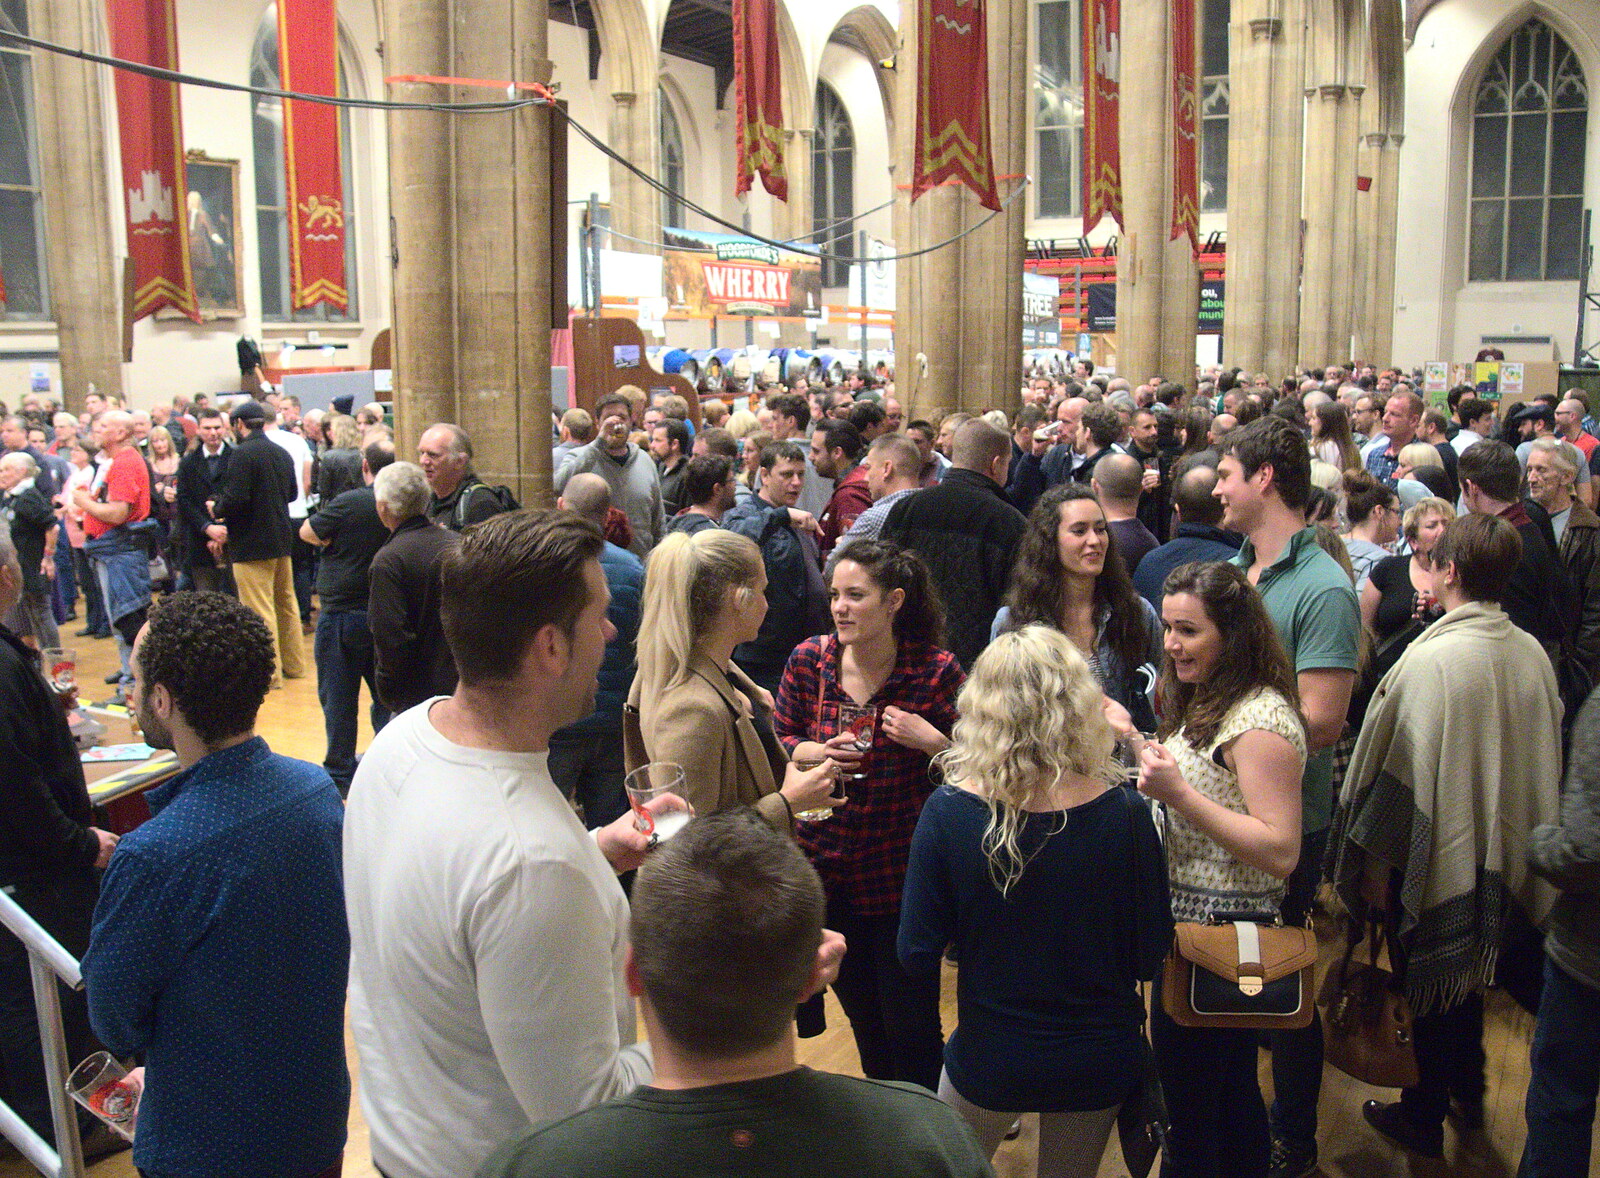 Festival crowds from The 38th Norwich Beer Festival, Norwich, Norfolk - 28th October 2015